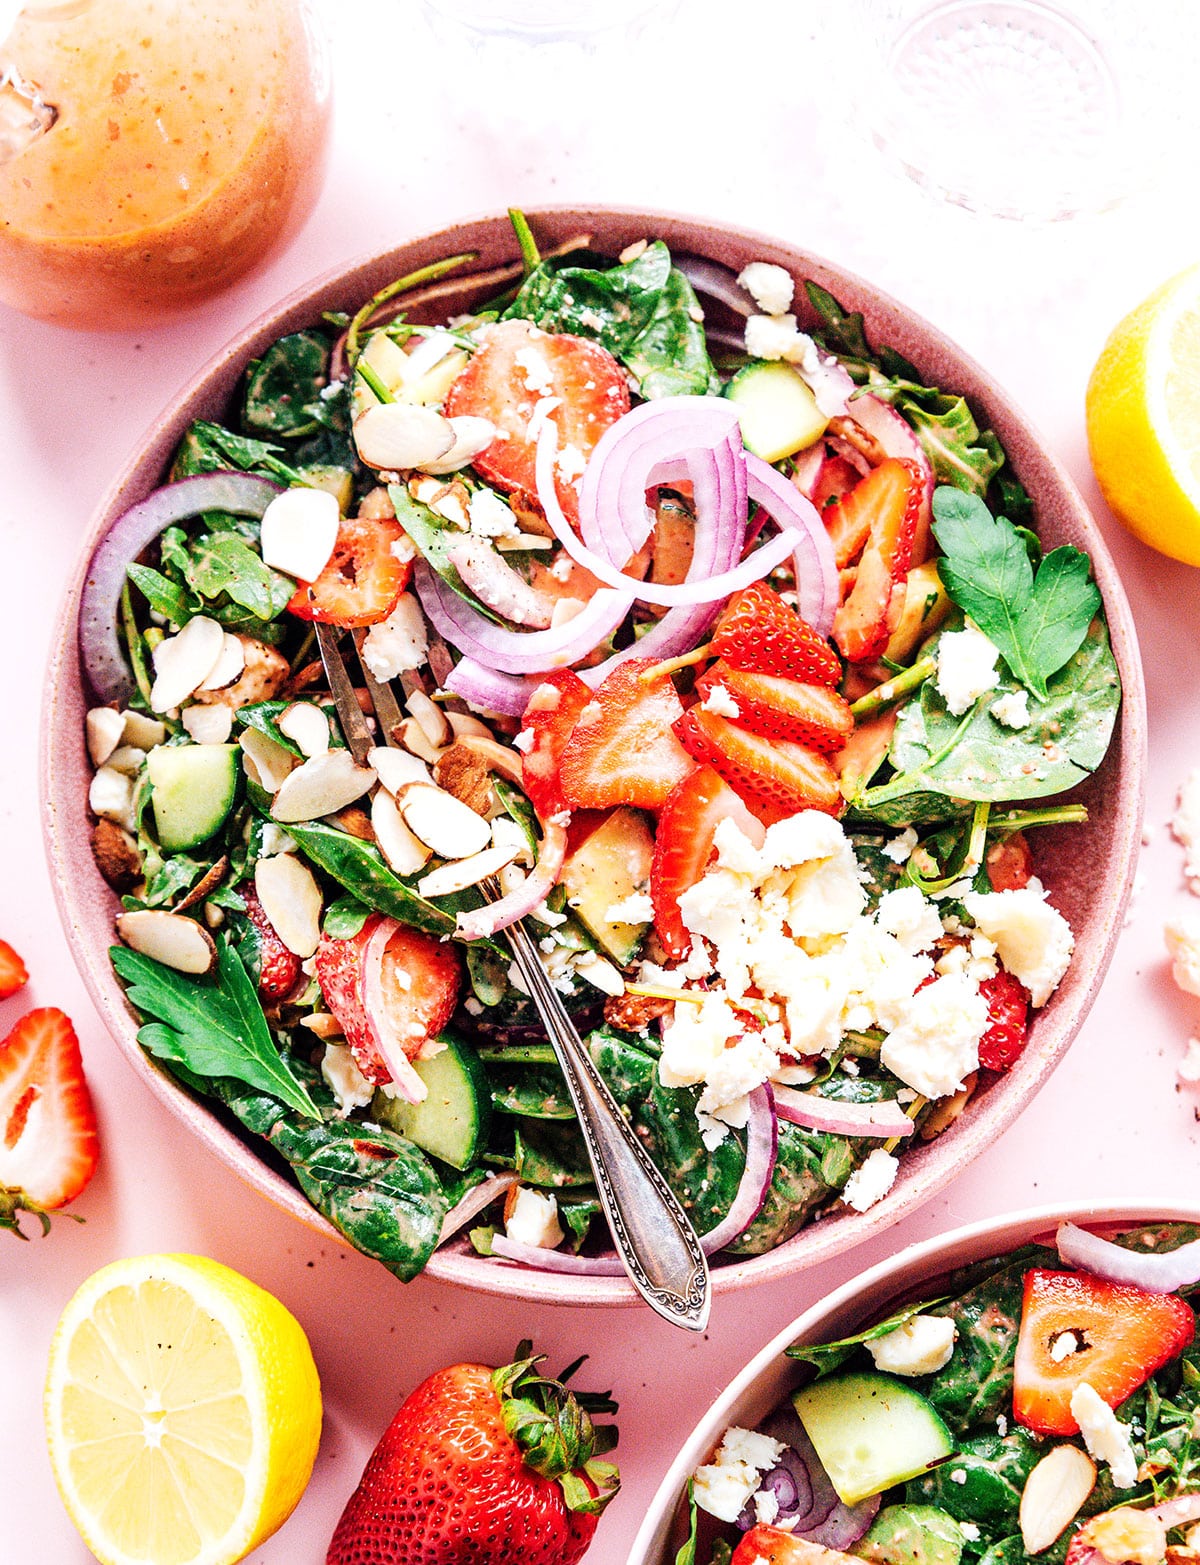 Strawberry spinach salad in a large pink bowl with a salad serving fork.